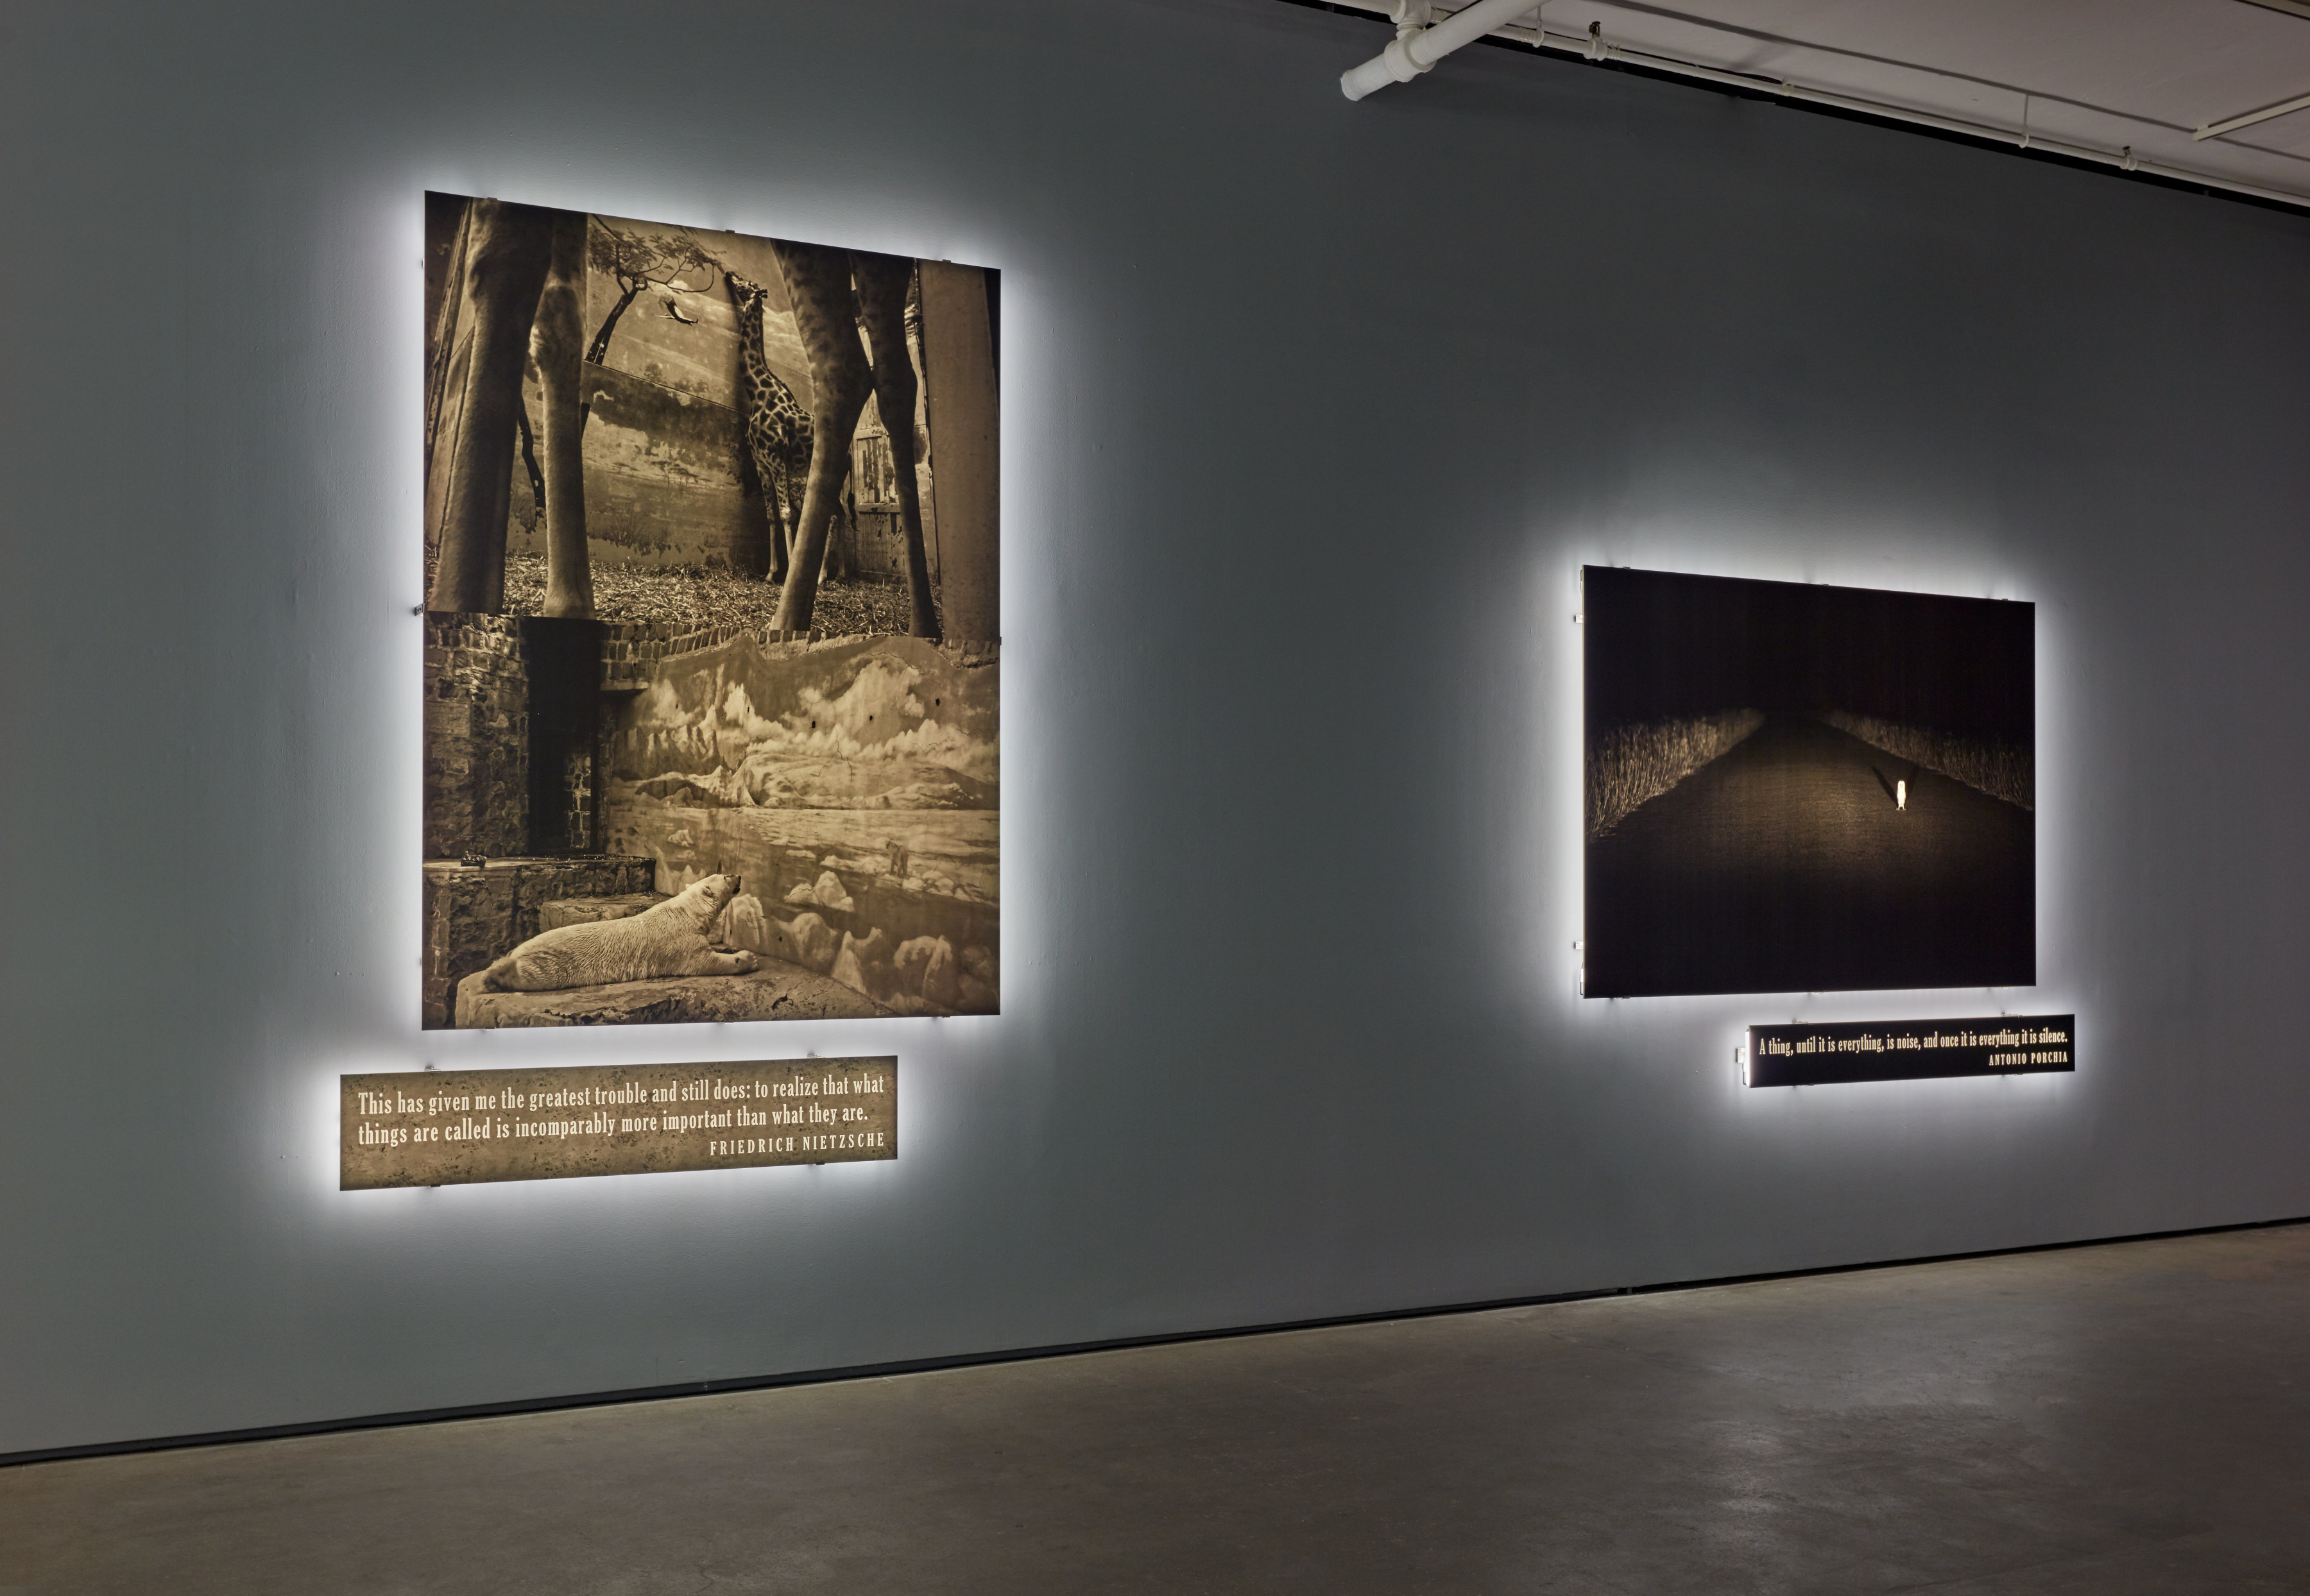 Joseph Kosuth | ‘Existential Time’ - Joseph Kosuth | ‘Existential Time’ - Viewing Room - Sean Kelly Gallery - Online Exhibition